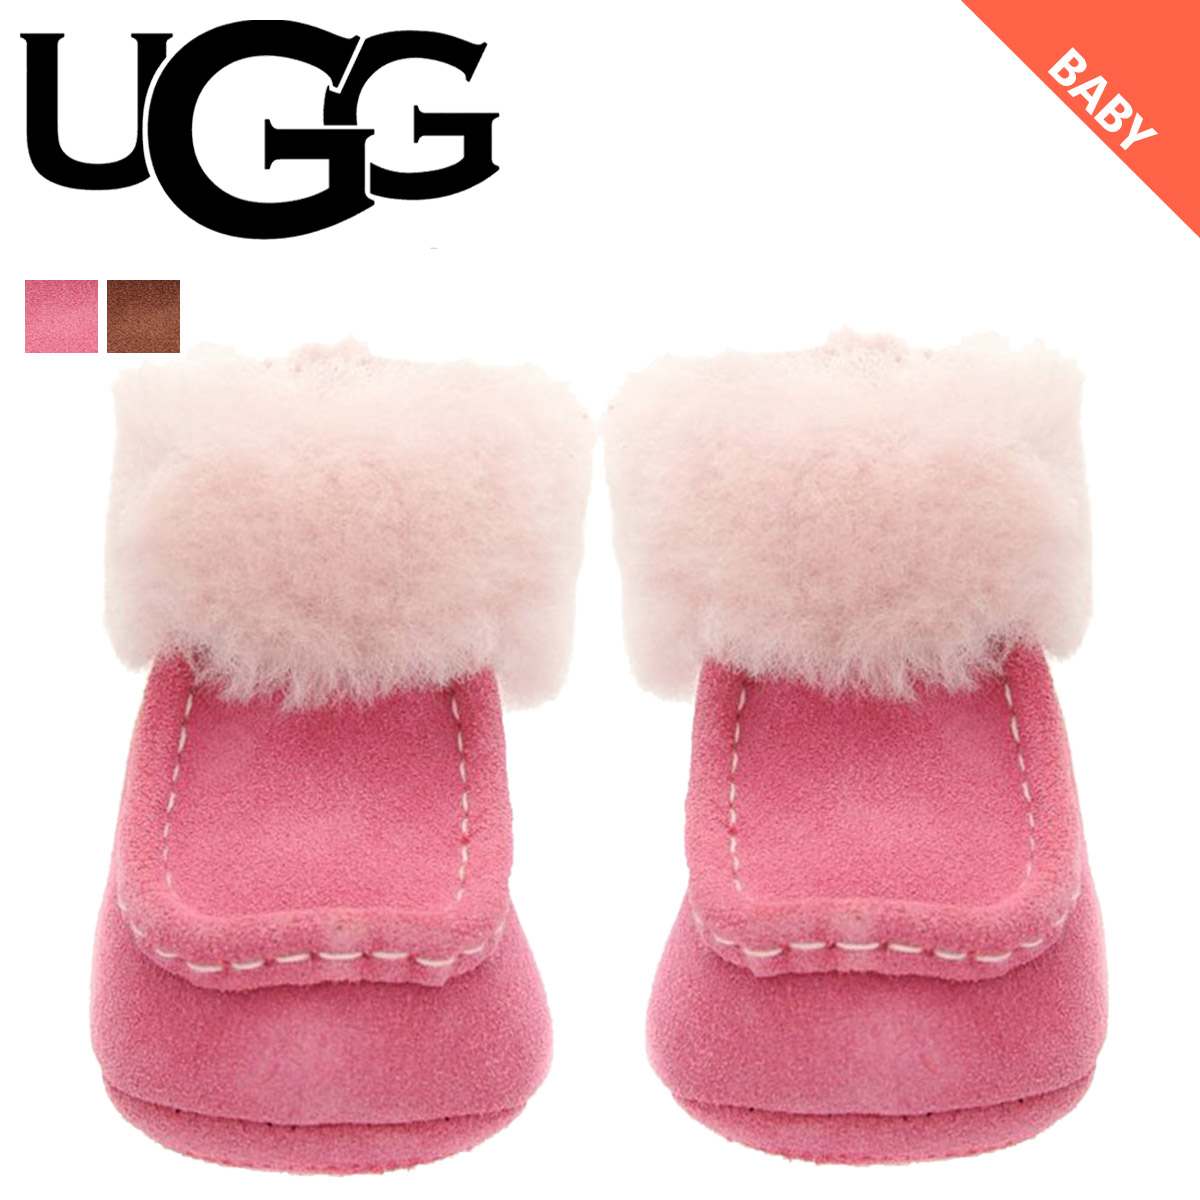 baby ugg shoes